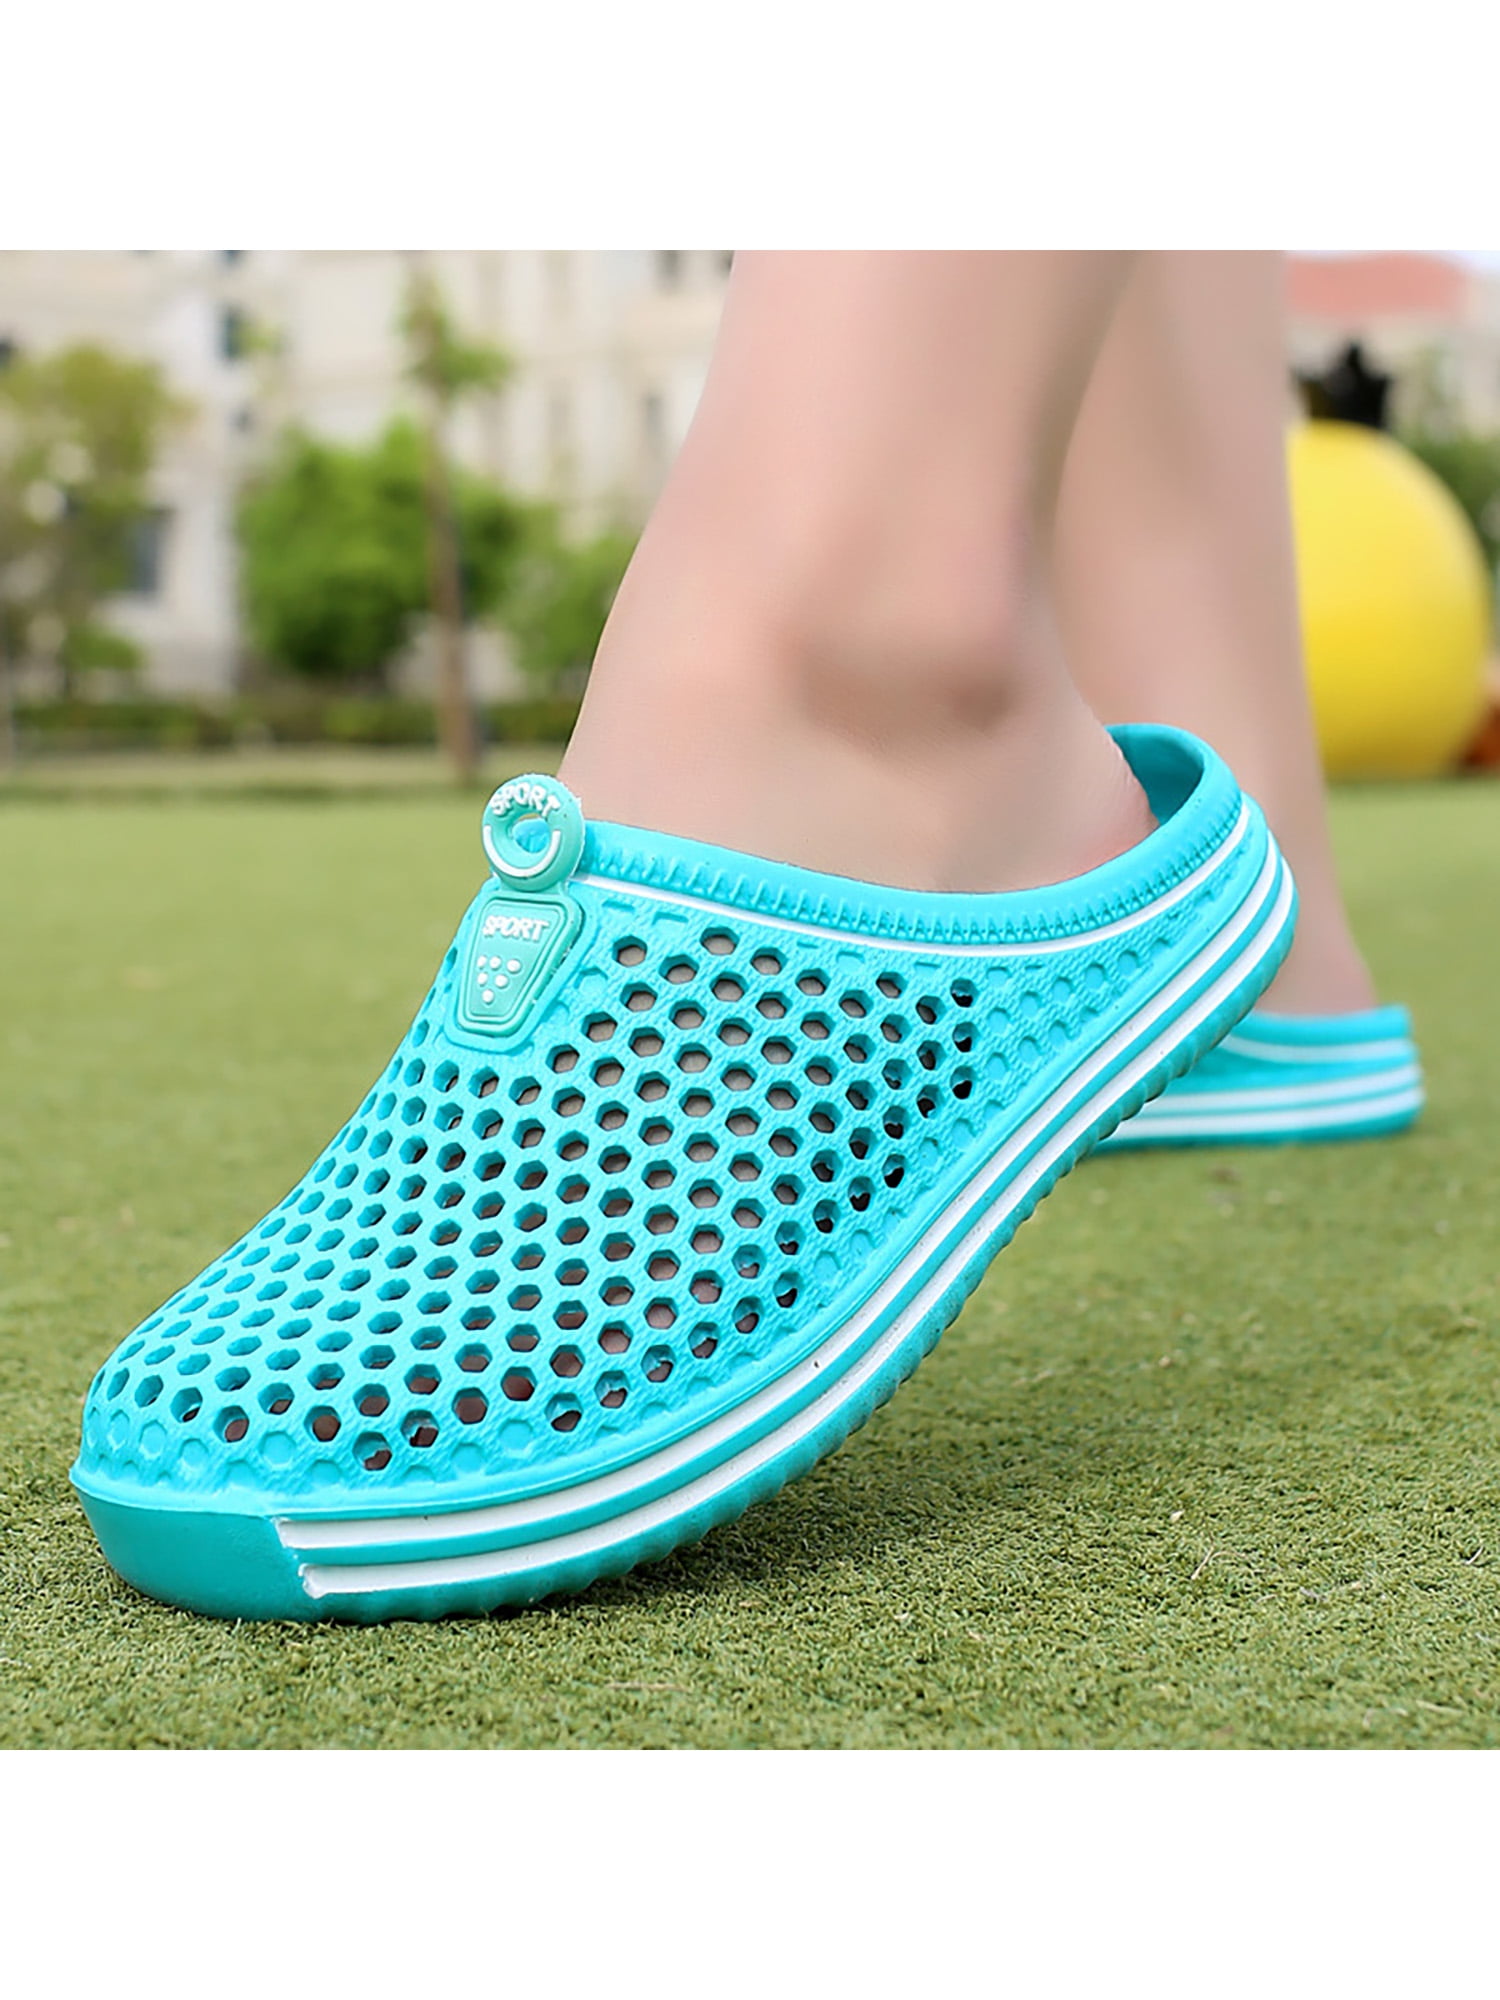 Men's Women Shoes Hollow Breathable Bathing Sandals Pool Barefoot Slip-Ons Water